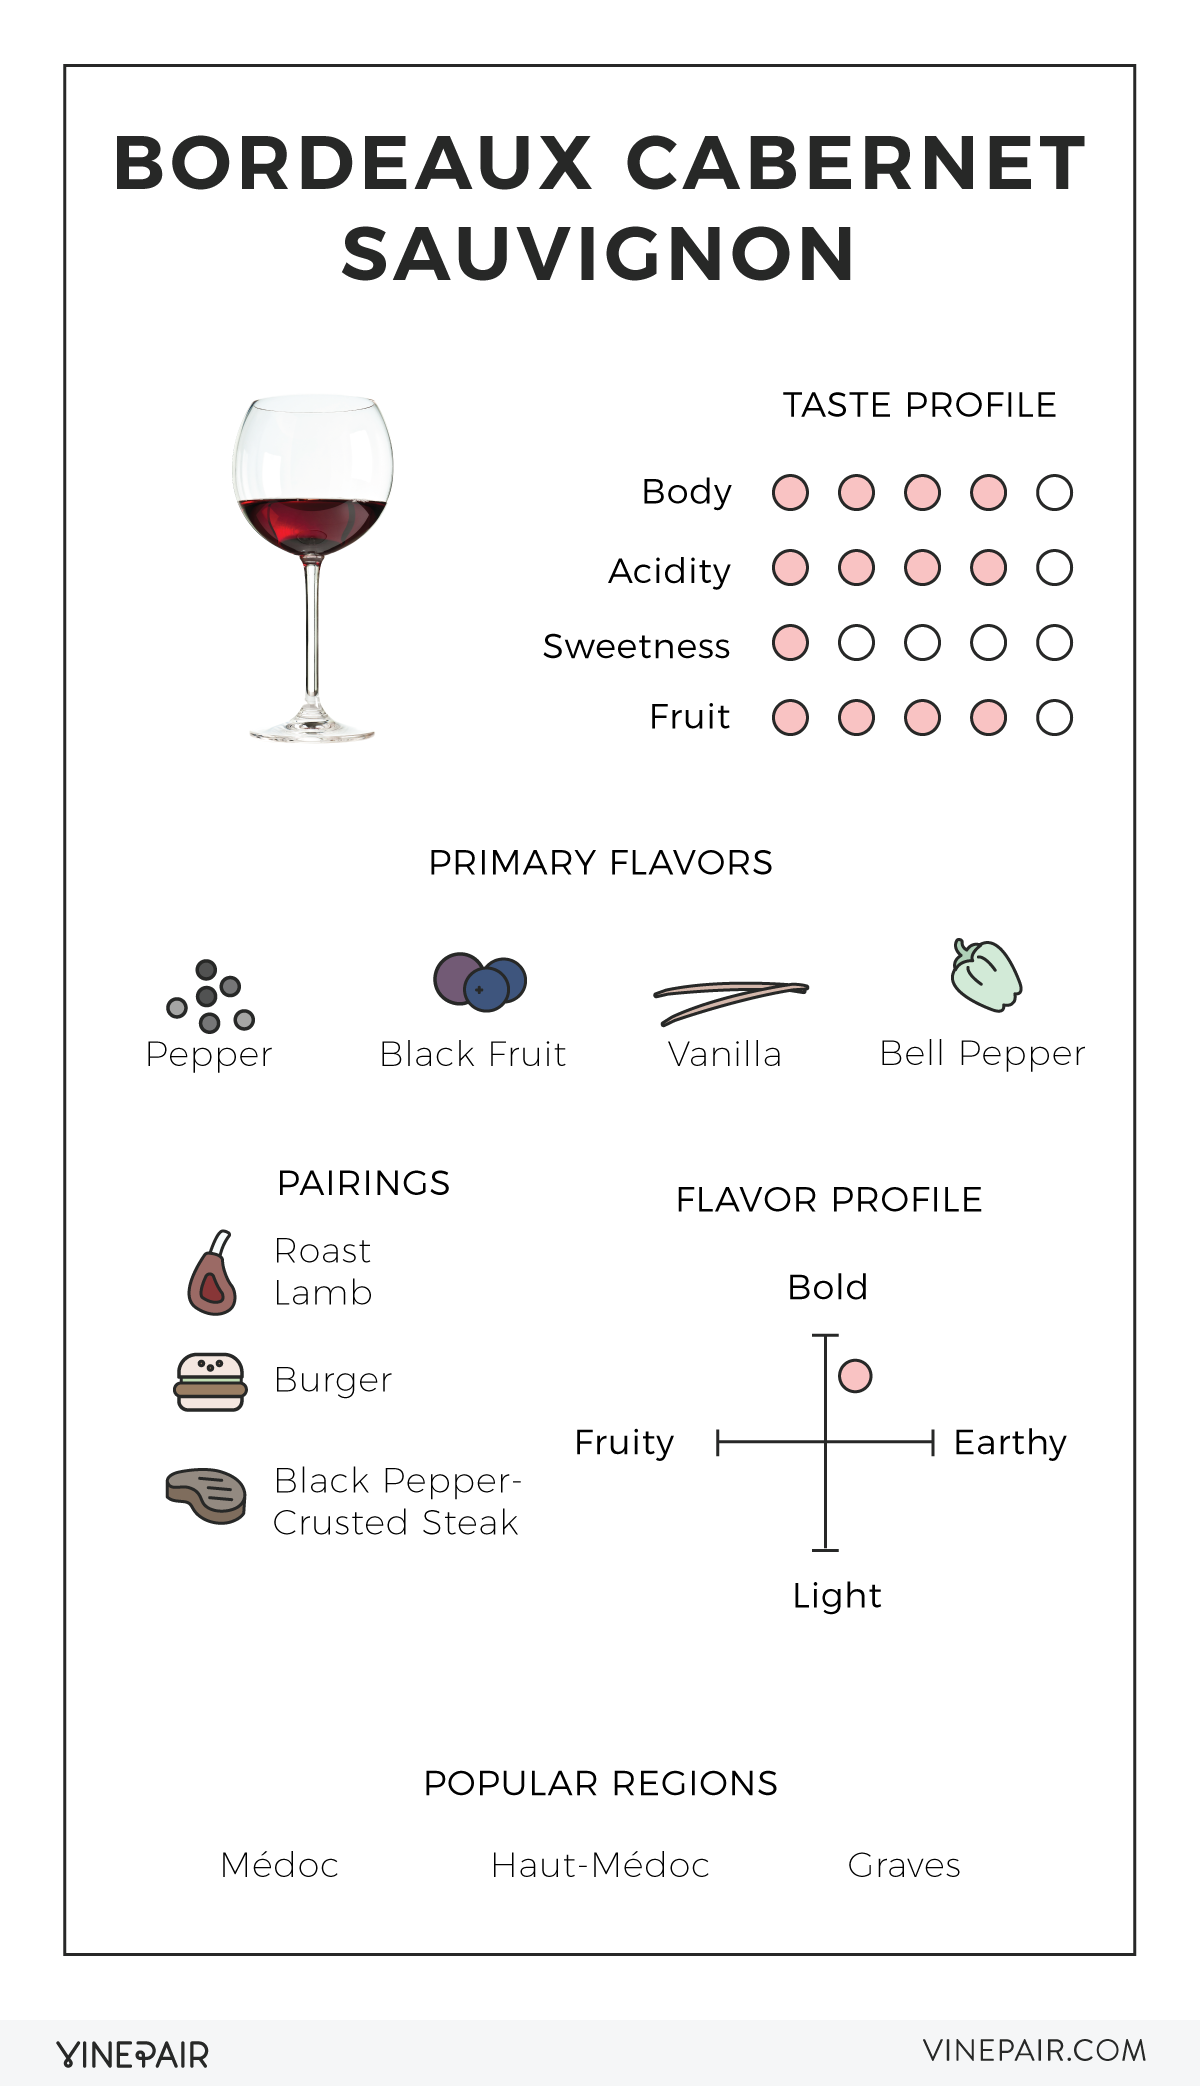 an illustrated guide to cabernet sauvignon from bordeaux